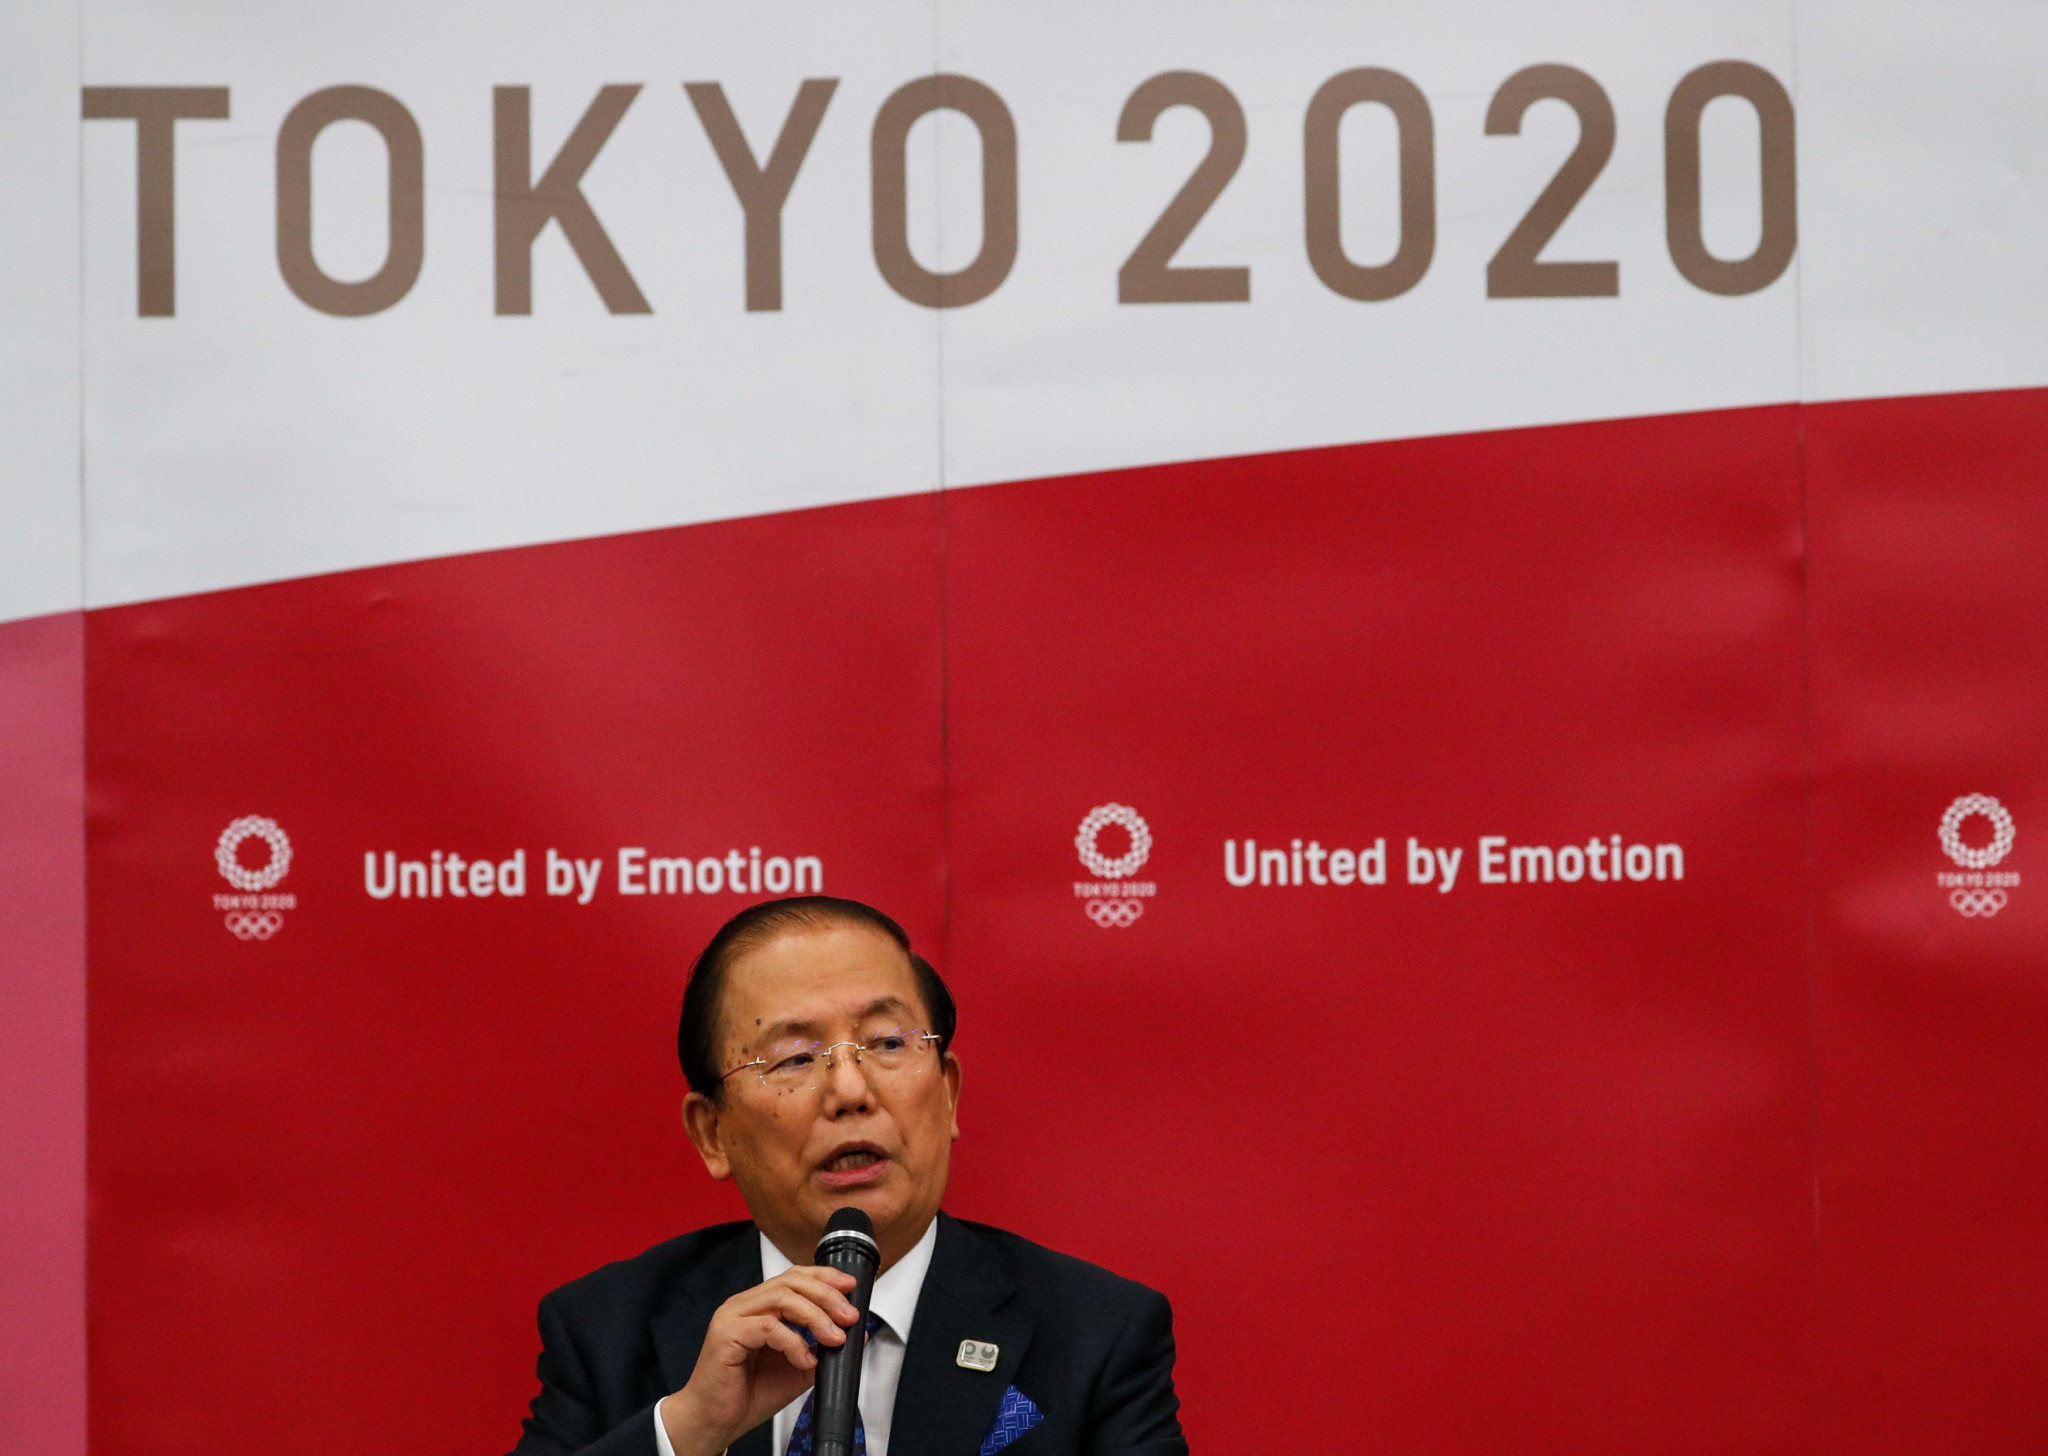 Tokyo 2020 chief executive Toshirō Mutō said recently that the Olympics now rescheduled to next summer because of the coronavirus pandemic will be a 